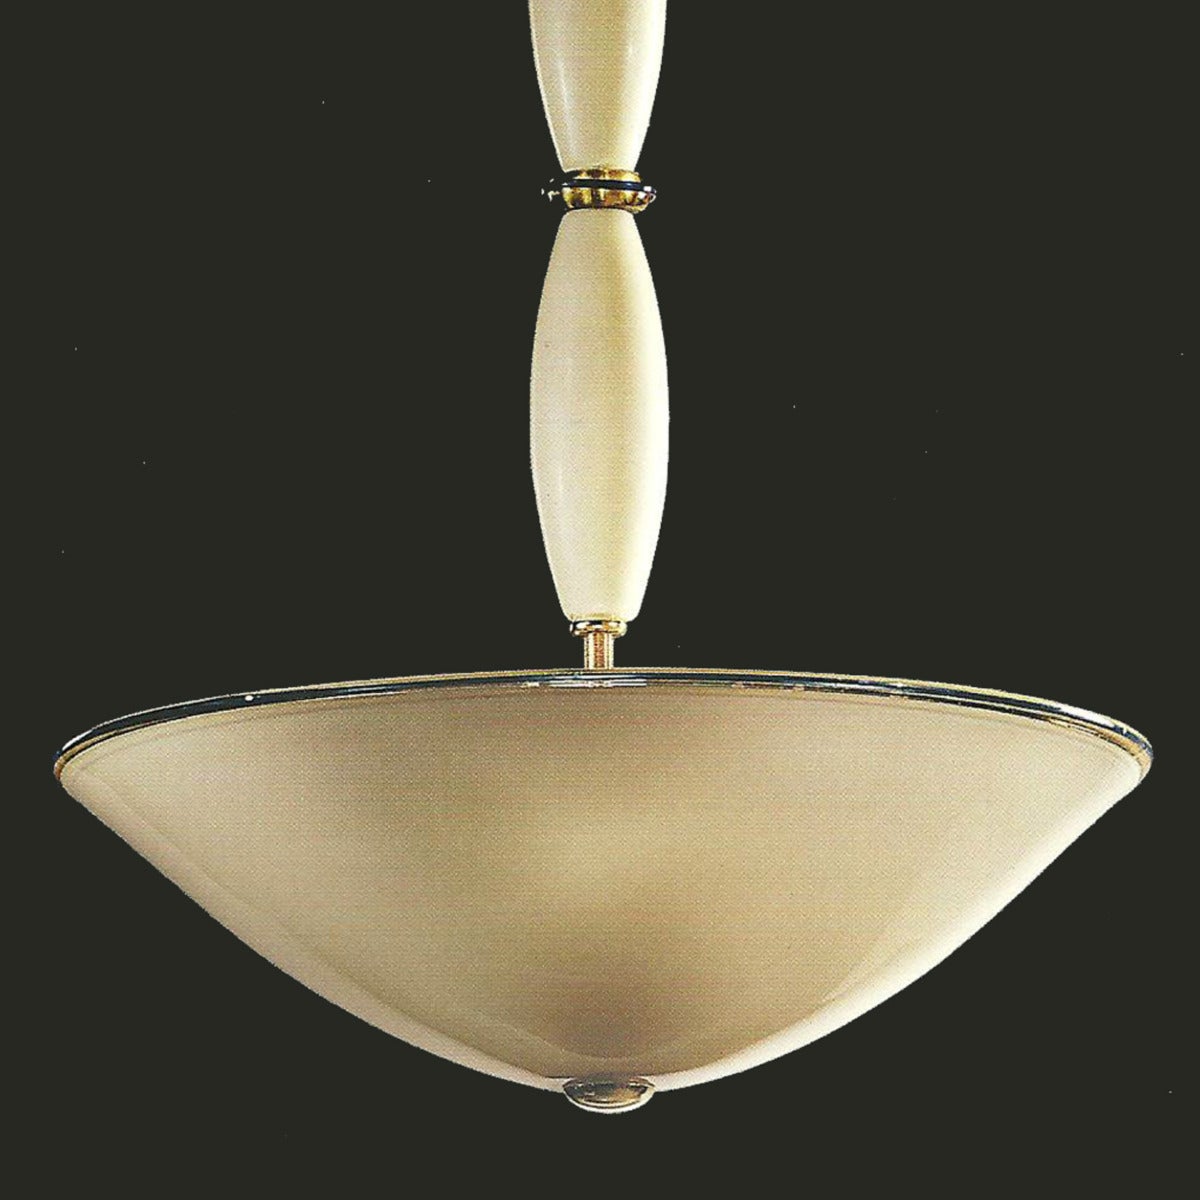 Elegant Italian midcentury style Venetian glass pendant or chandelier in opaline ivory color glass with a transparent ivory disc reflector with blue trim.

Three-light at 100 watts each. UL wired and approved.

Priced and sold individually.